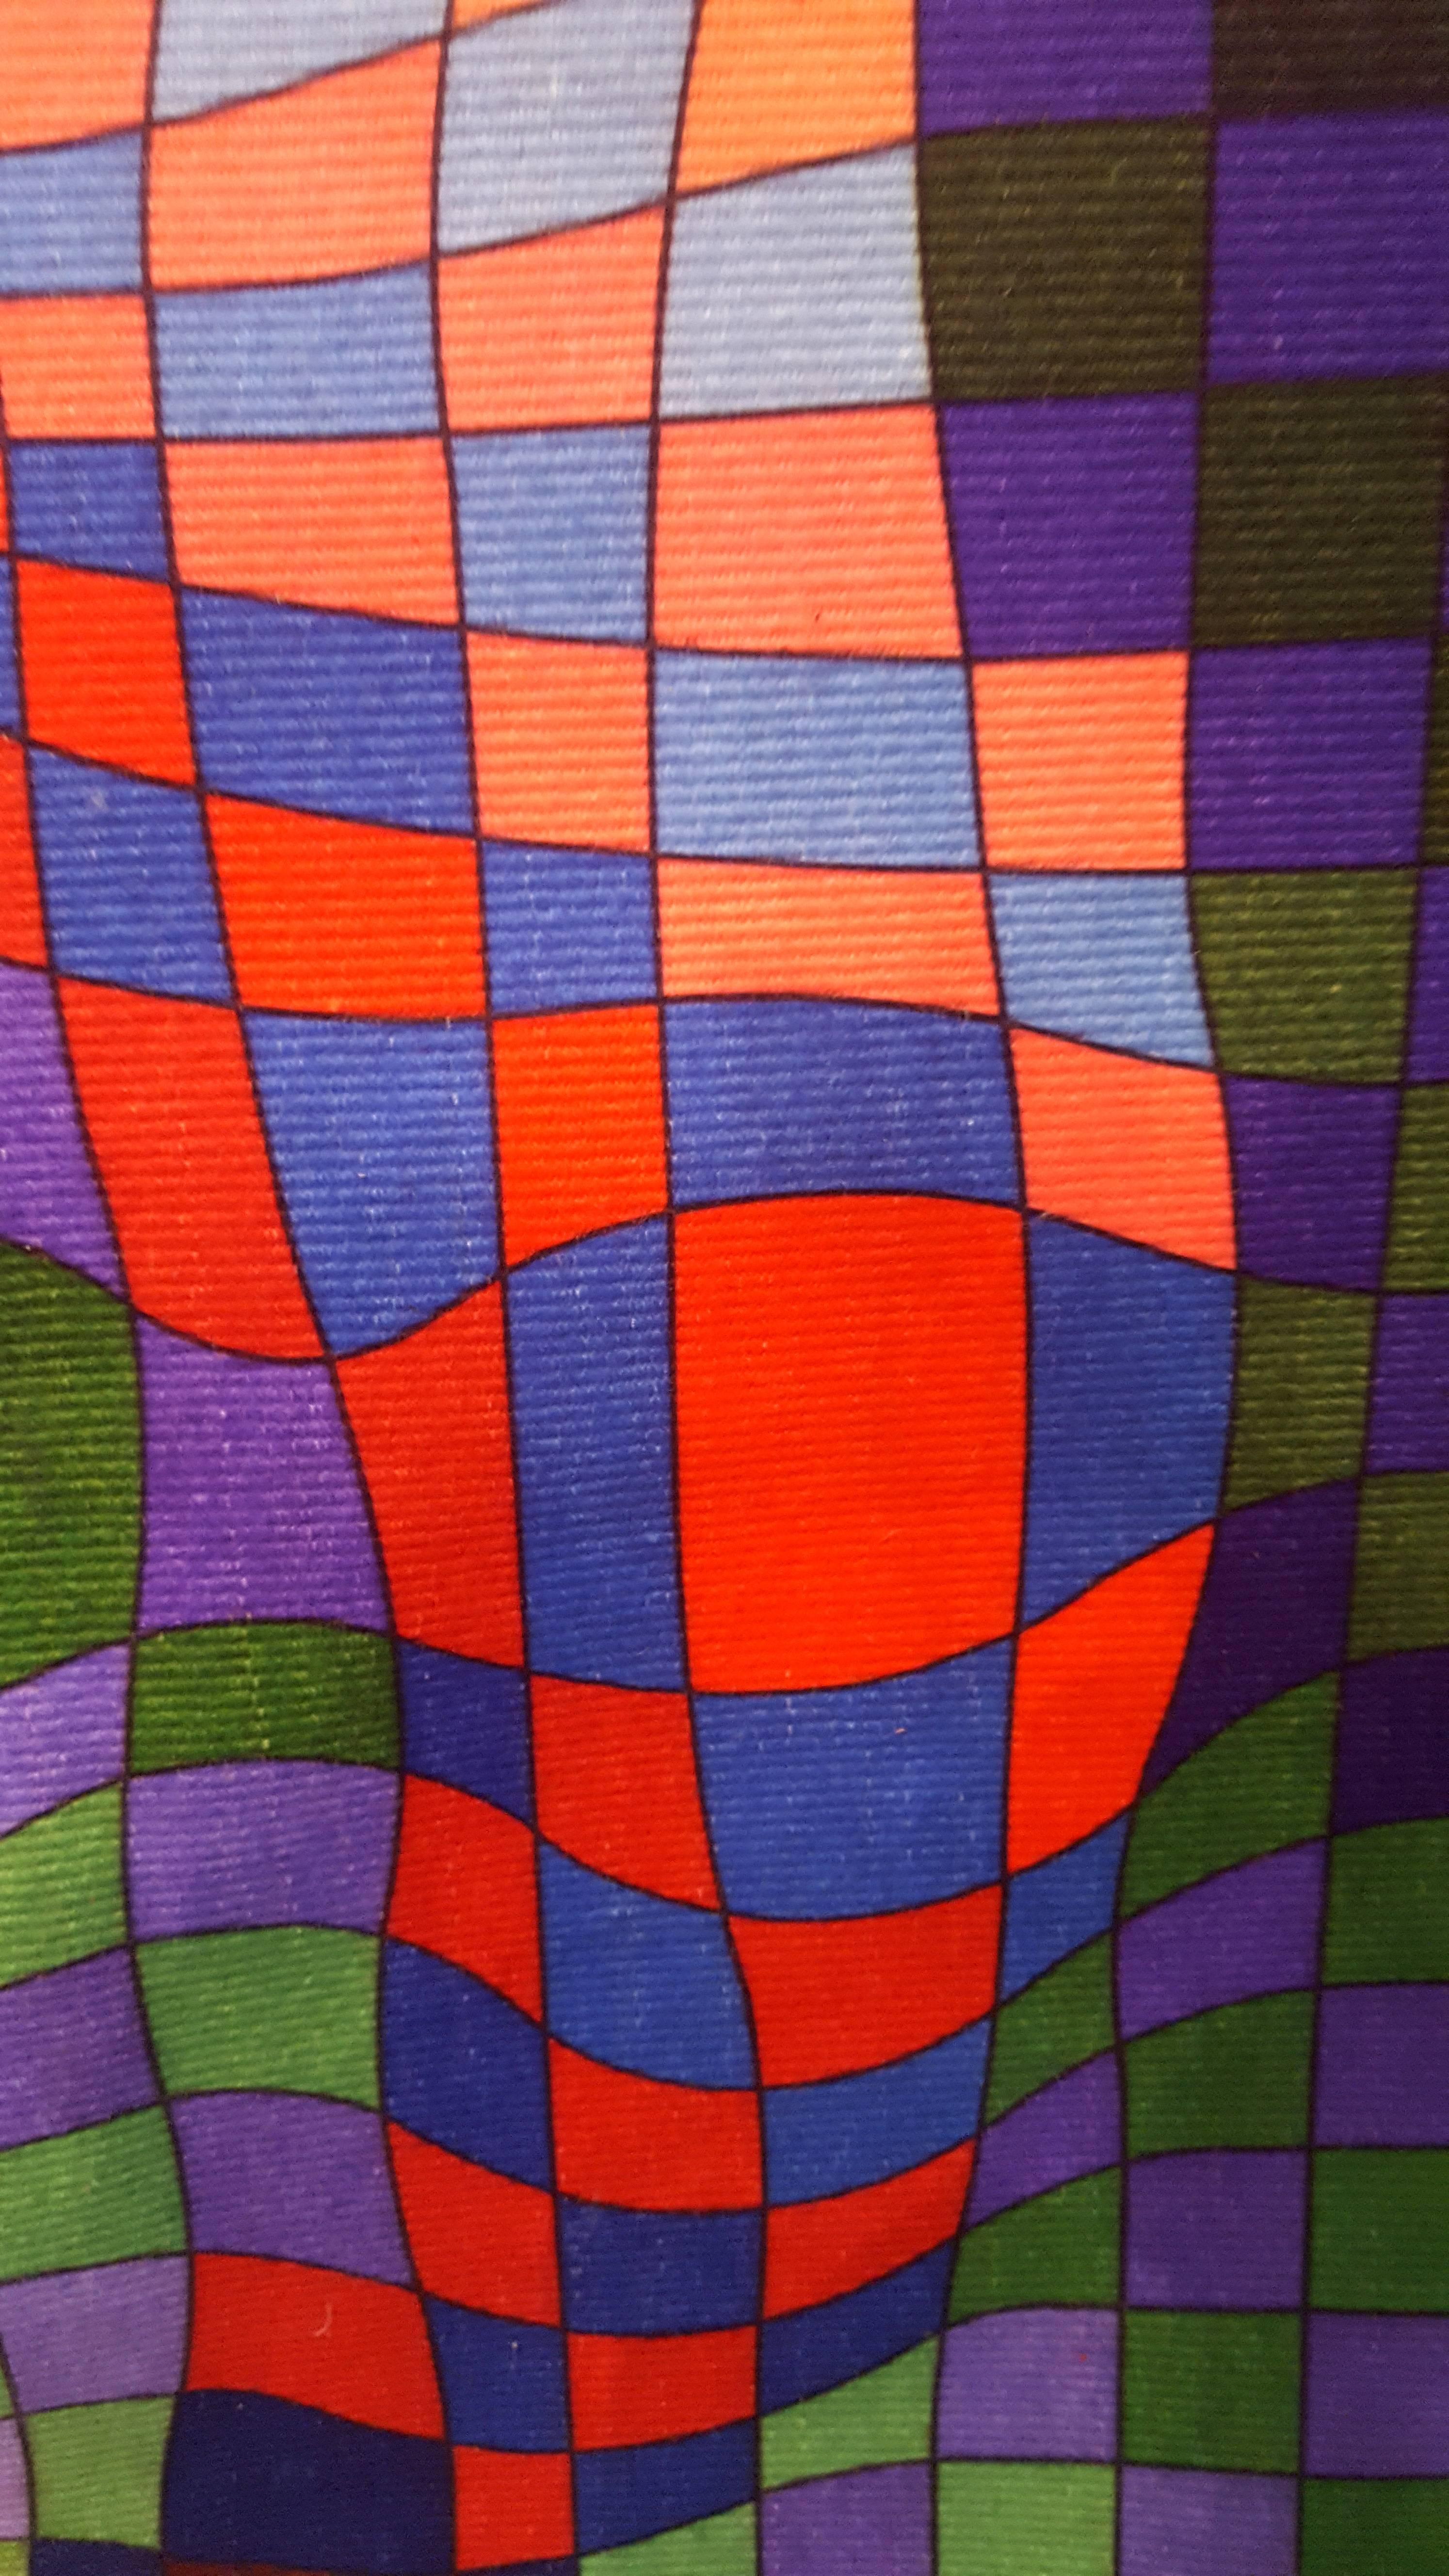 Victor Vasarely (1906-1997).
Panderlak, 
circa 1983
Measures: 120 x 72 cm
Hand signed and numbered on the back, edition of 320.

Victor Vasarely, whose original name was Gyözö Vásárhelyi, was born in Pécs, Hungary on 9 April 1908. In 1927 Vasarely